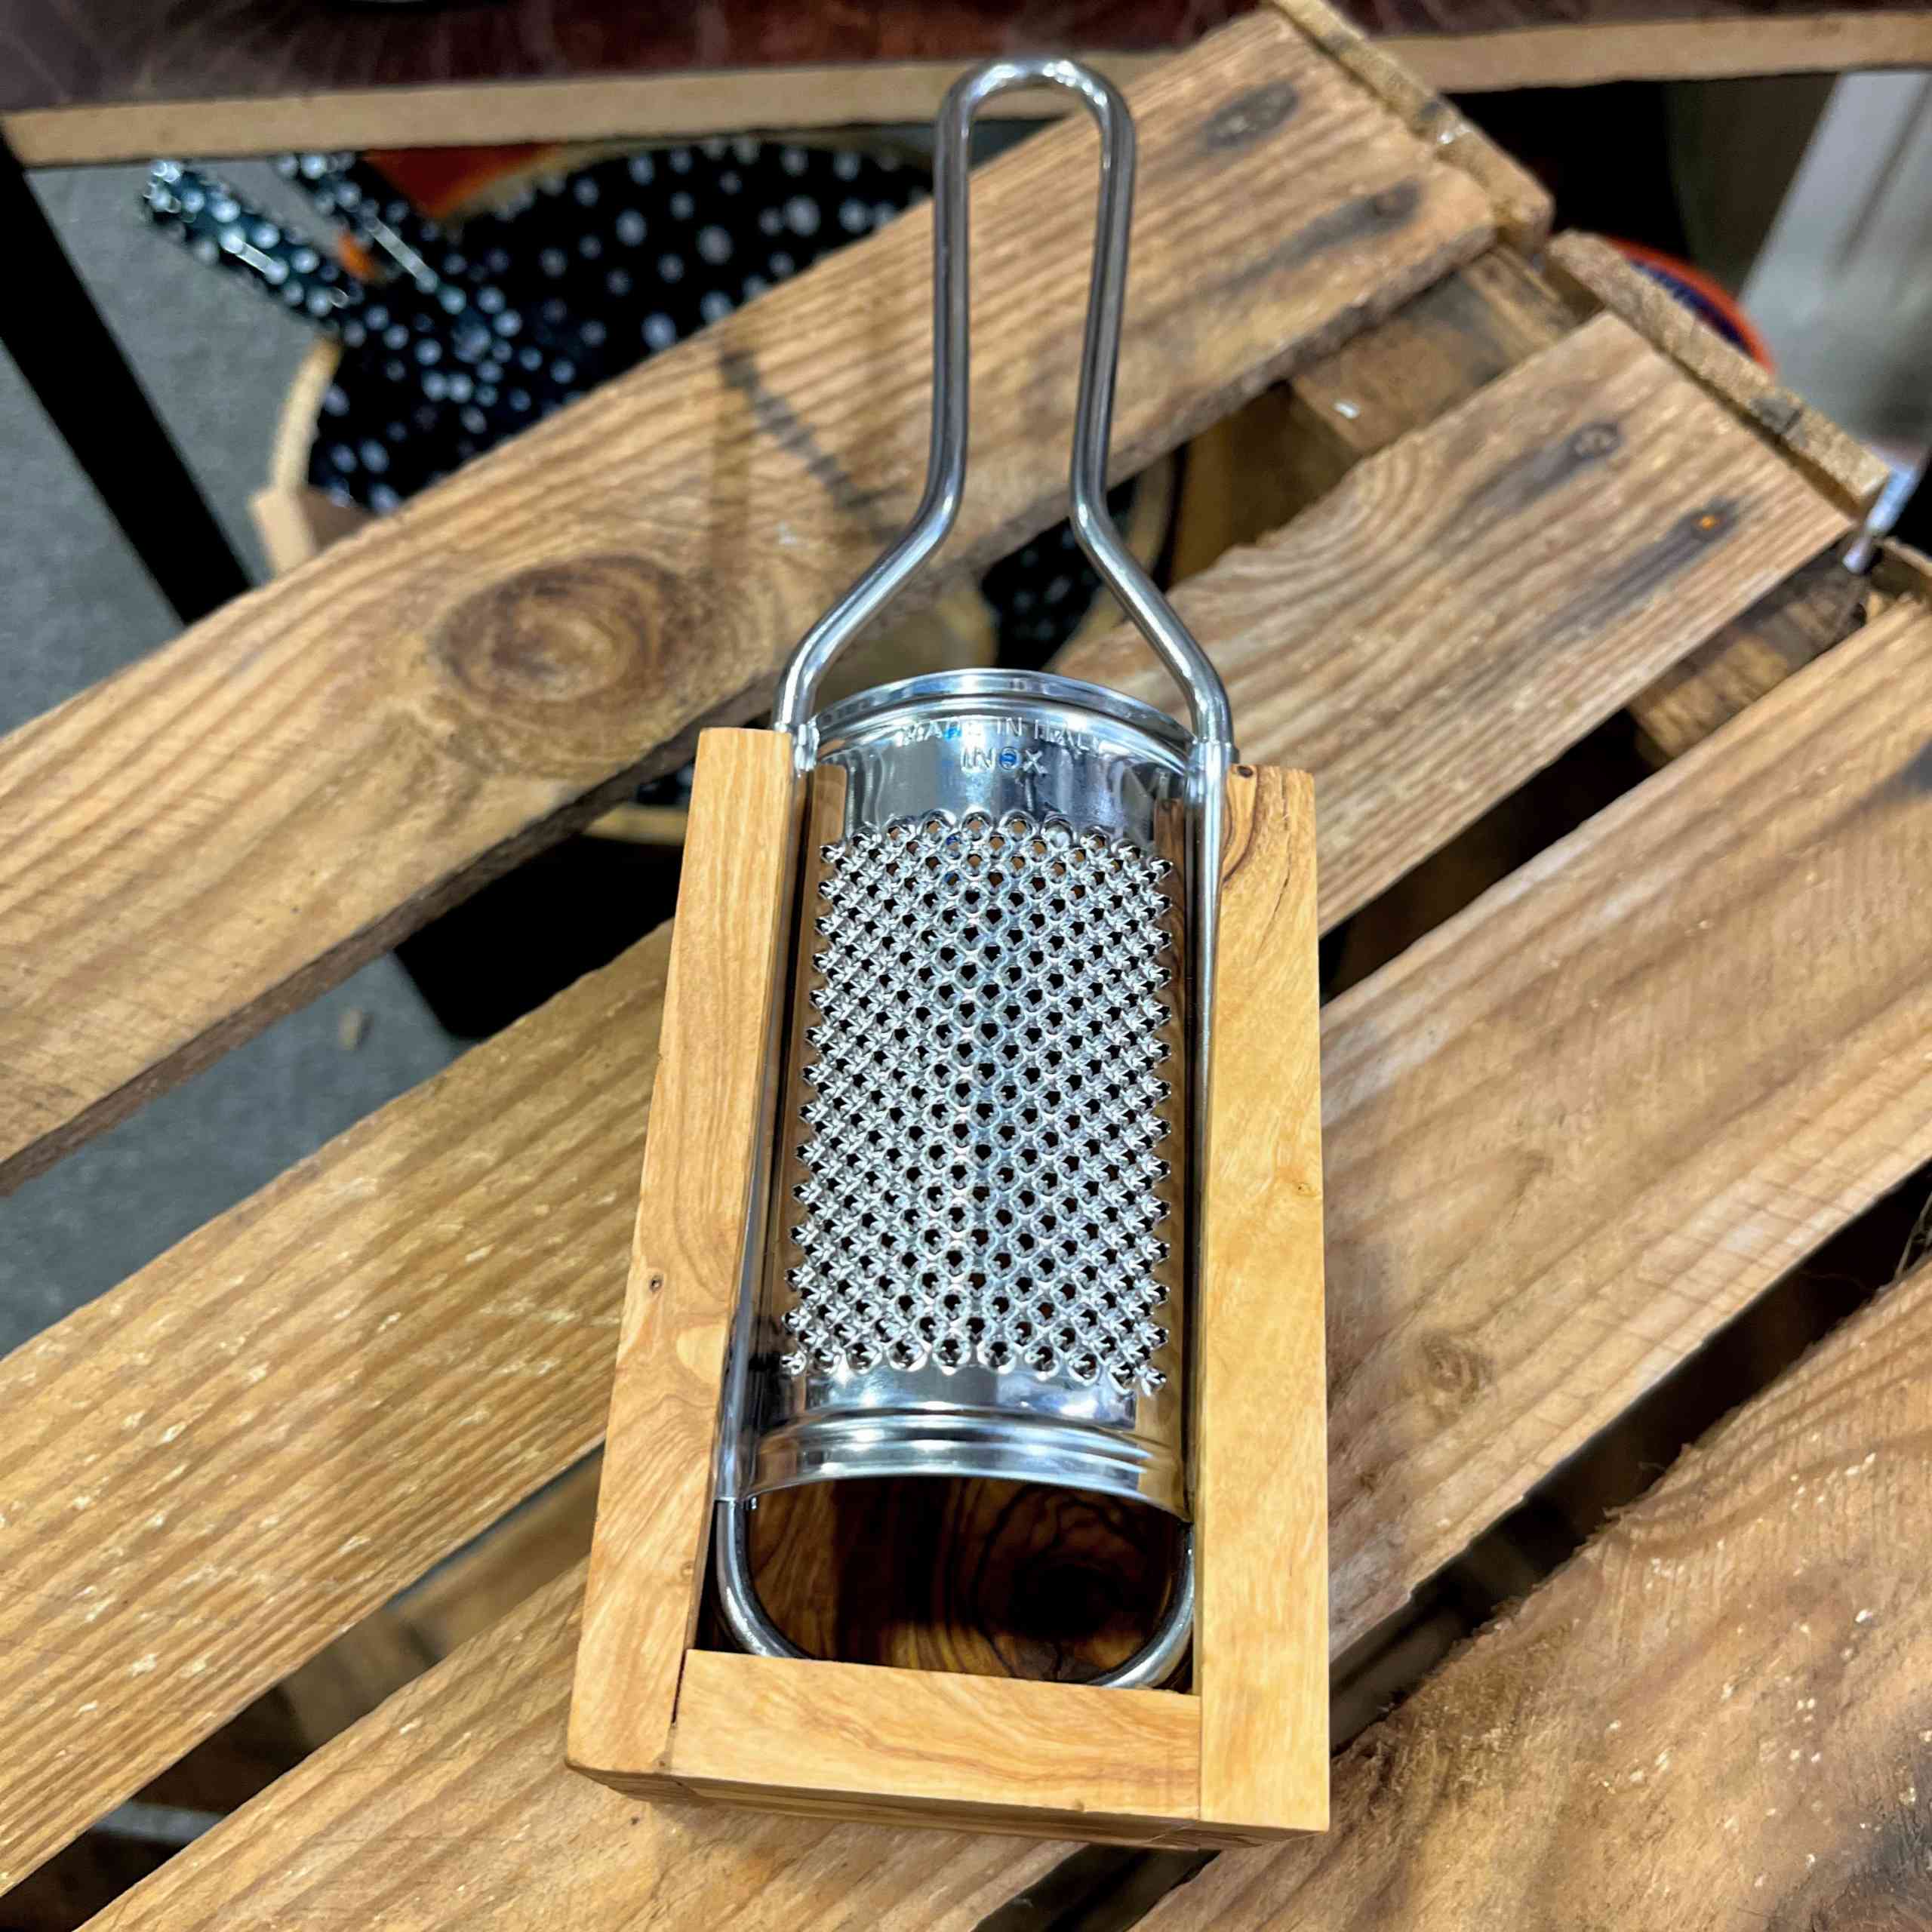 Italian Olivewood Flat Cheese Grater